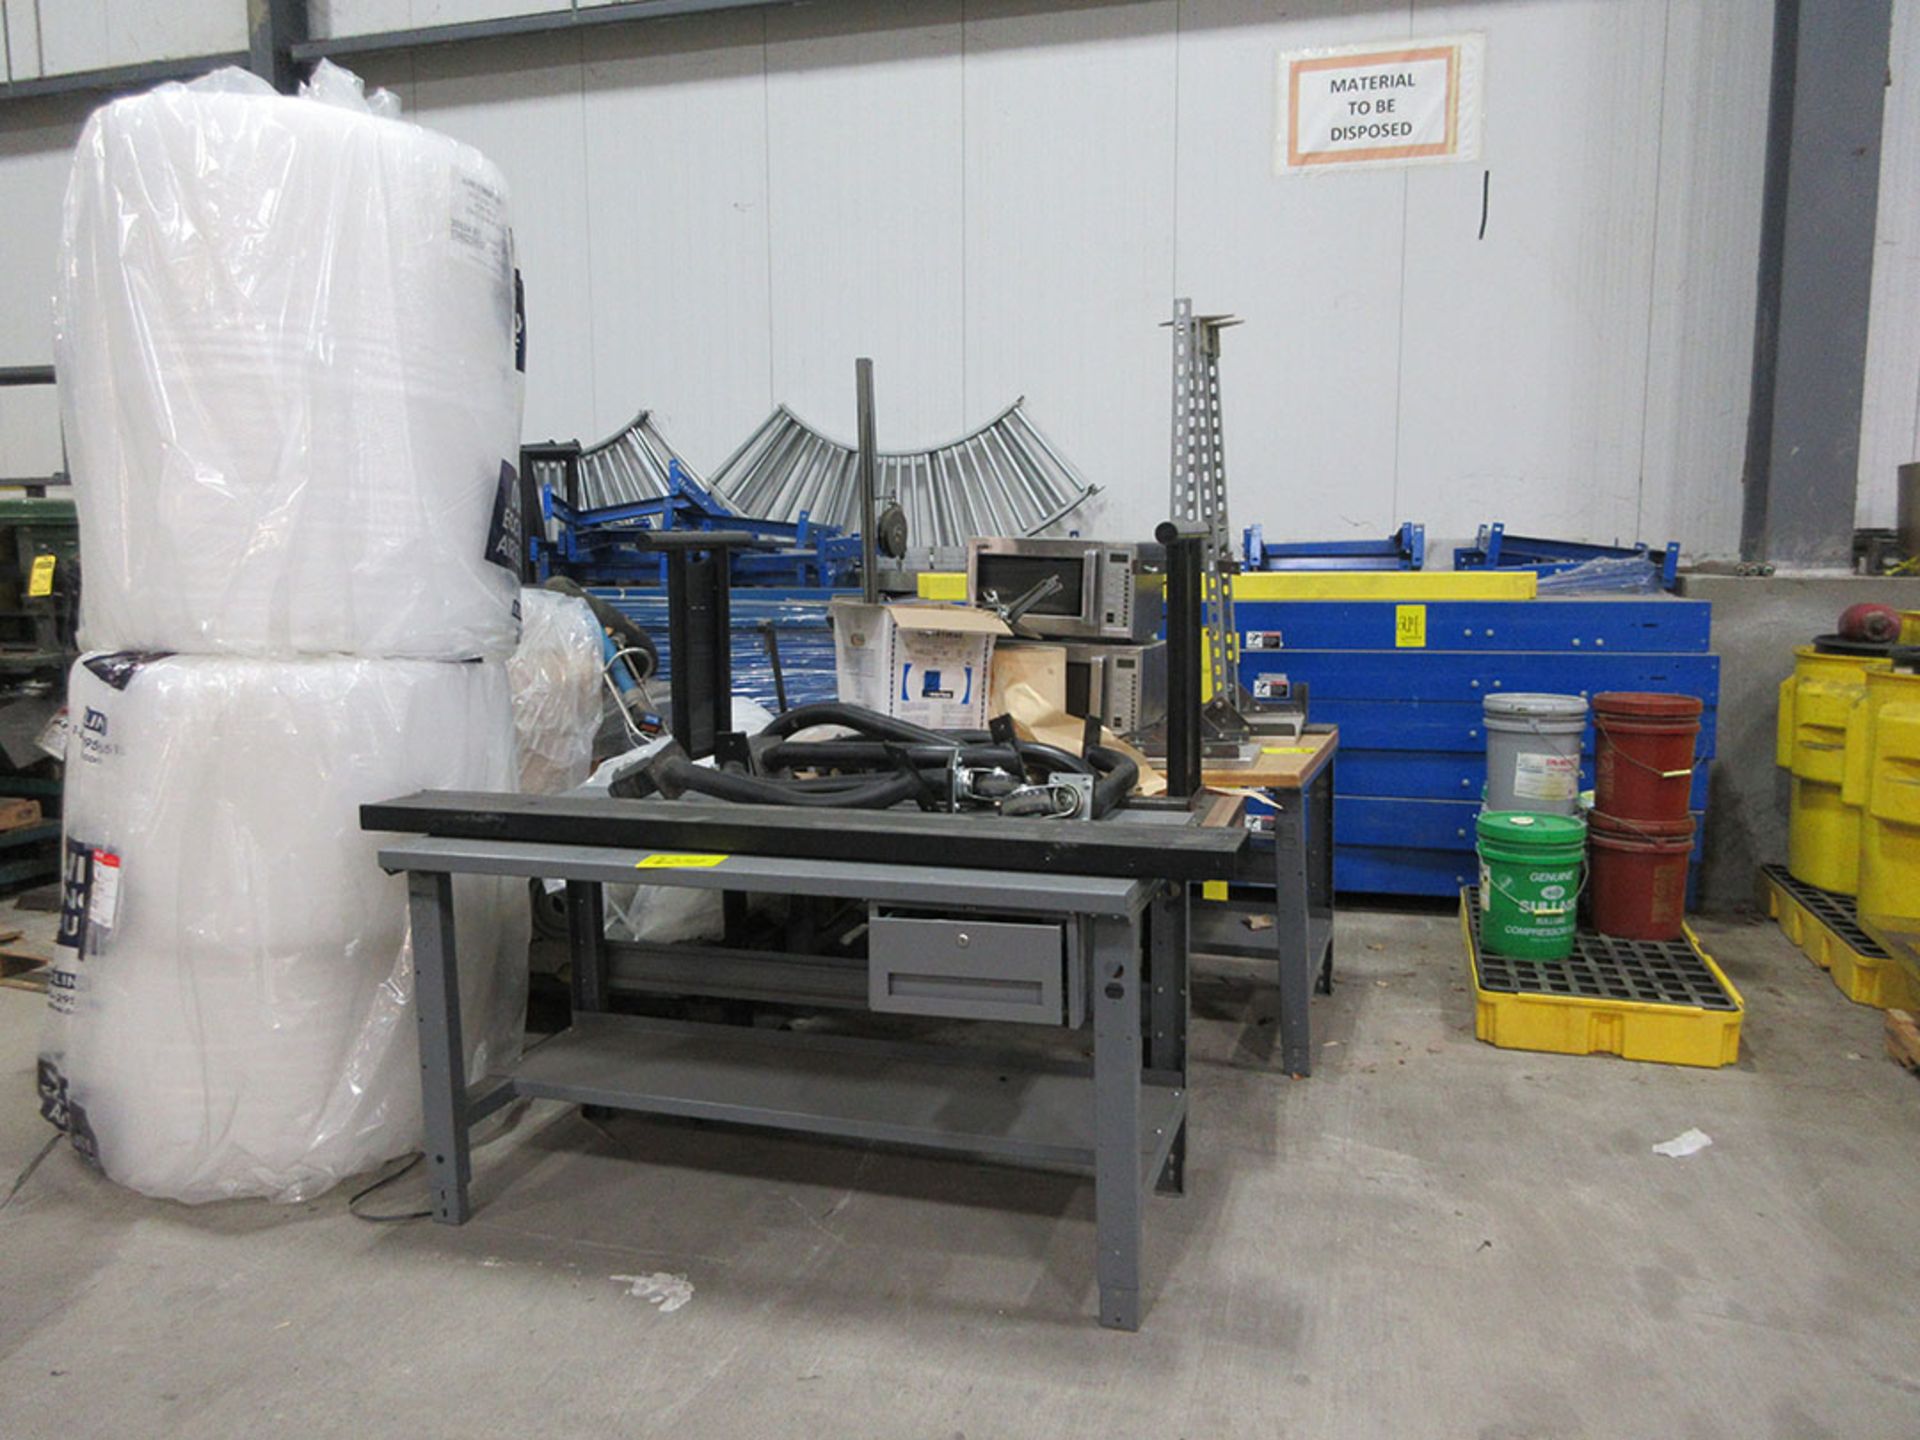 CONVEYOR, WIRE DECKING, TABLES, CENTRAL MACHINERY 16 SPEED DRILL PRESS, DAYTON 10'' CONTRACTOR,